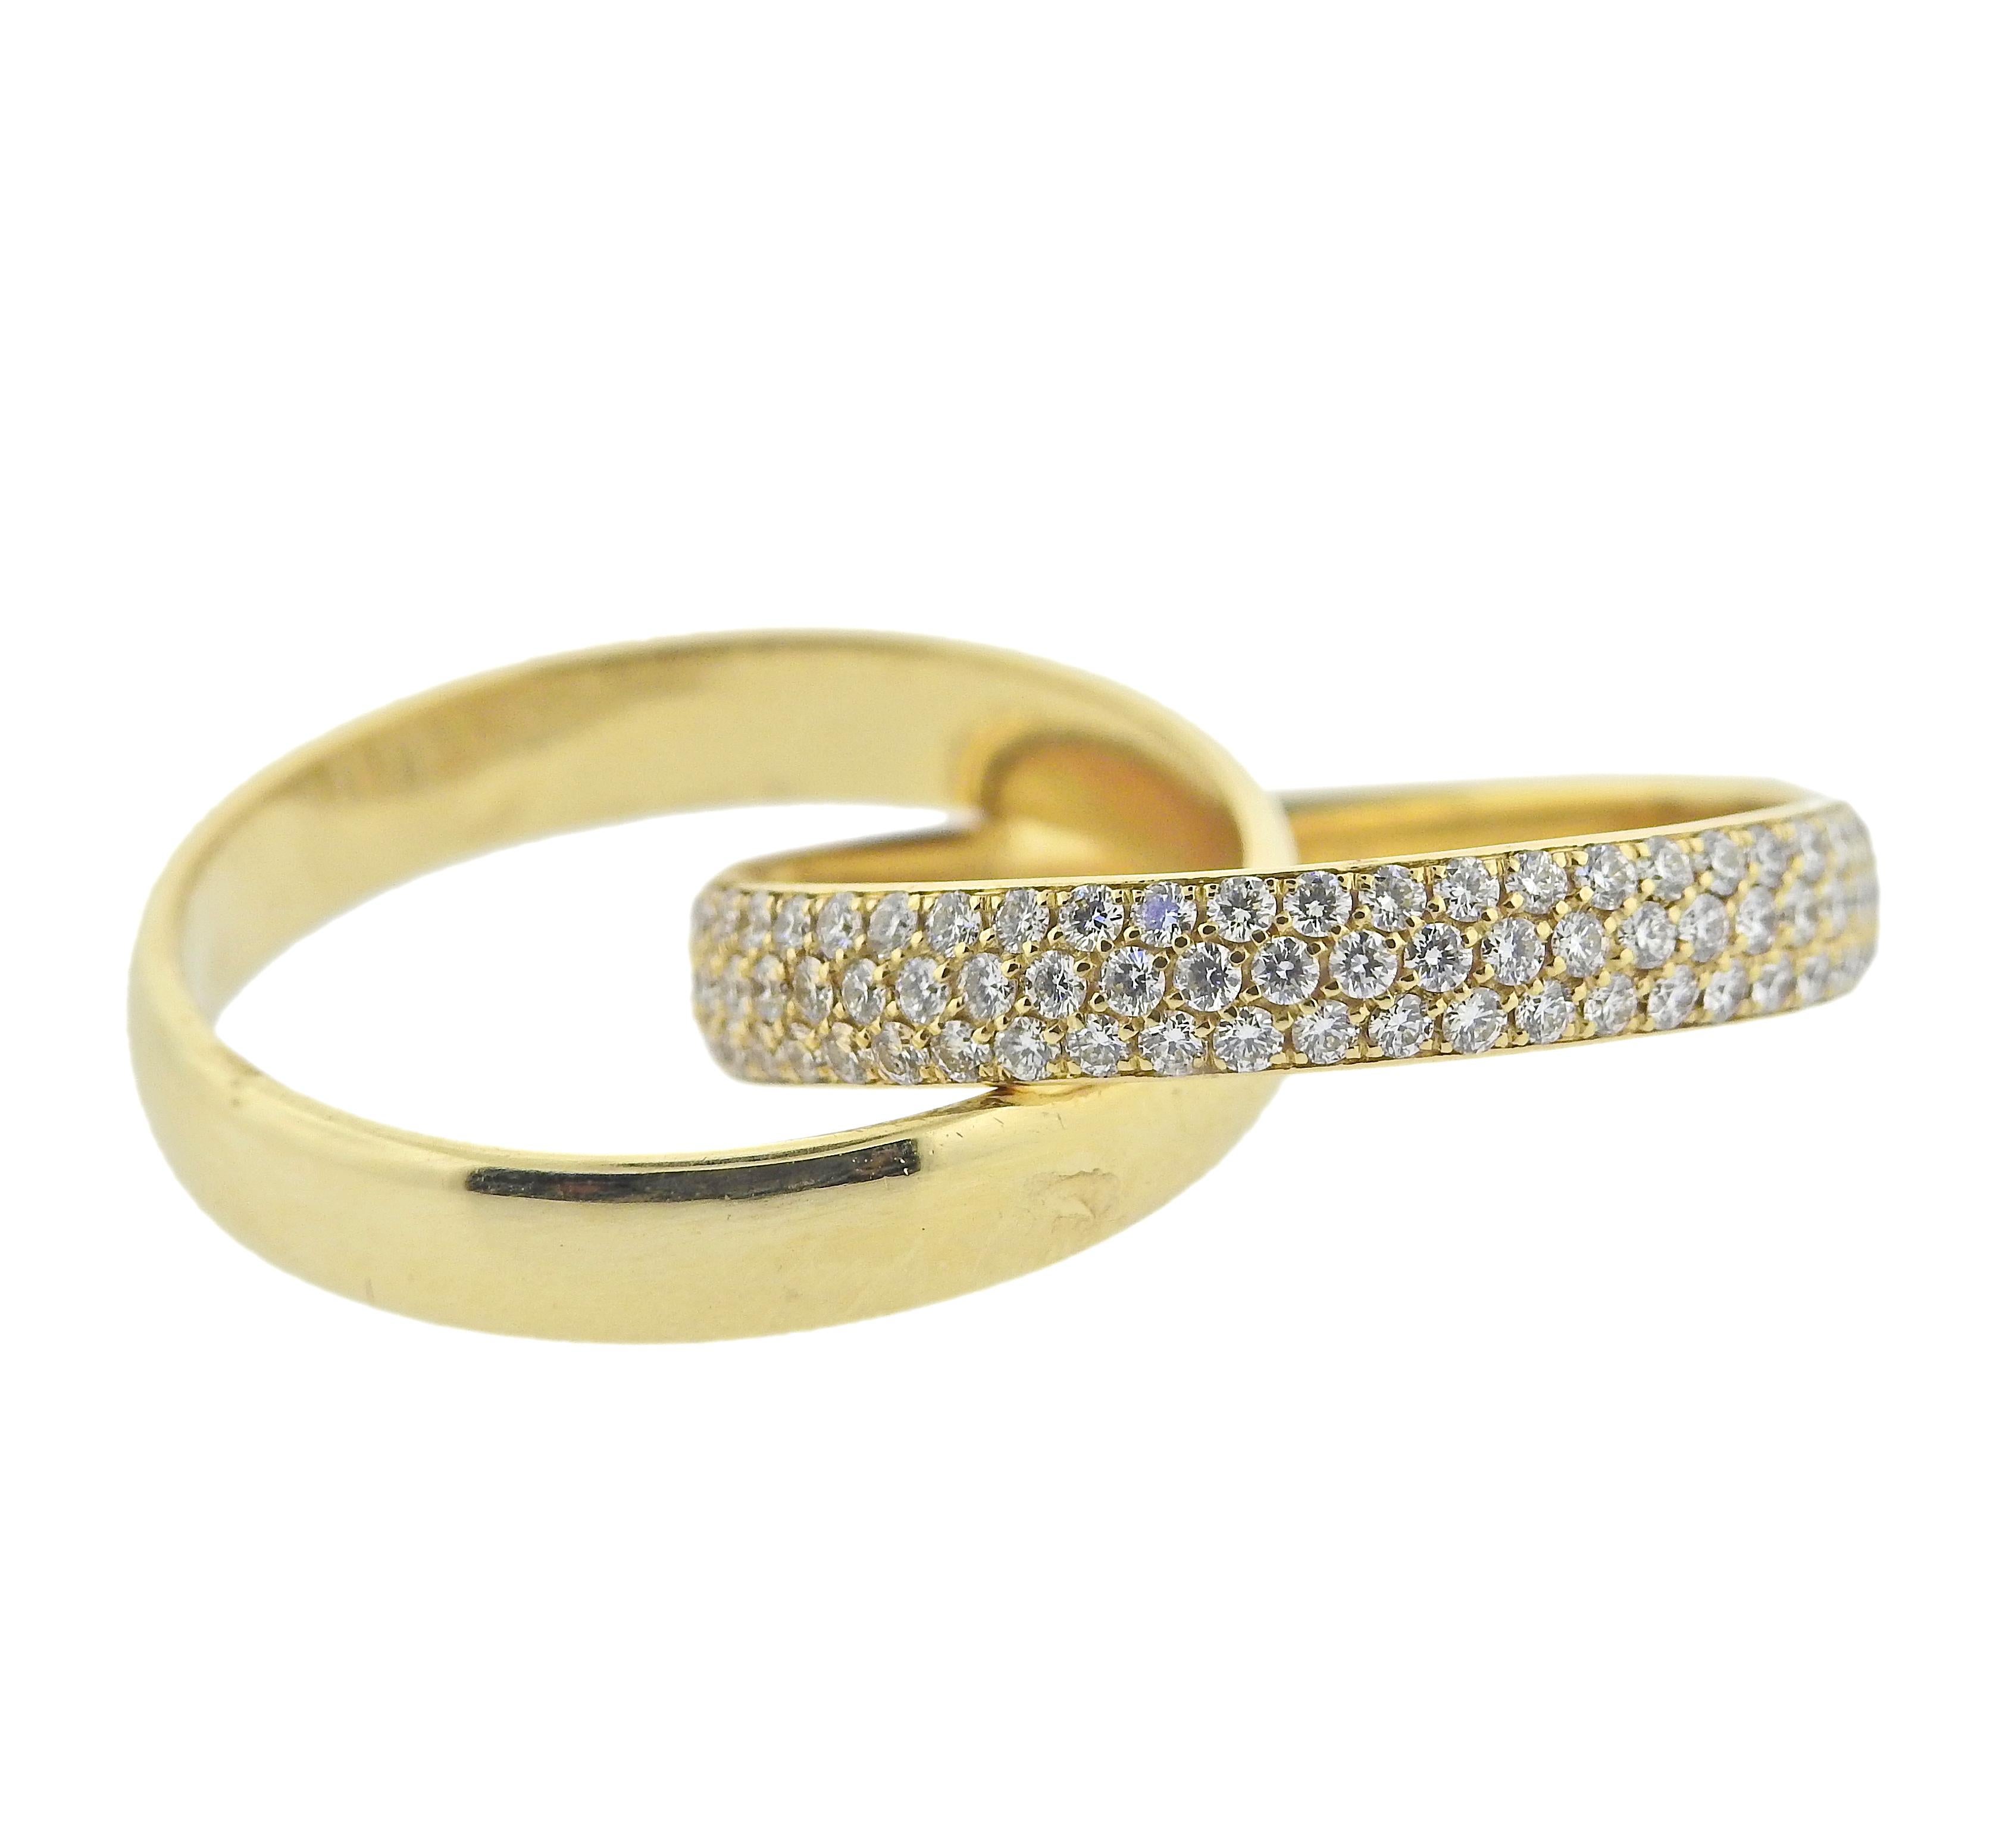 Tiffany & Co Paloma Picasso 18k yellow gold double rolling band ring with 0.88ctw G/VS diamonds. Retail $8000. Ring size 8.5, ring is approx. 8mm wide. Weight - 6.8 grams. Marked: Paloma Picasso, Tiffany & Co, Au750,  Italy. 